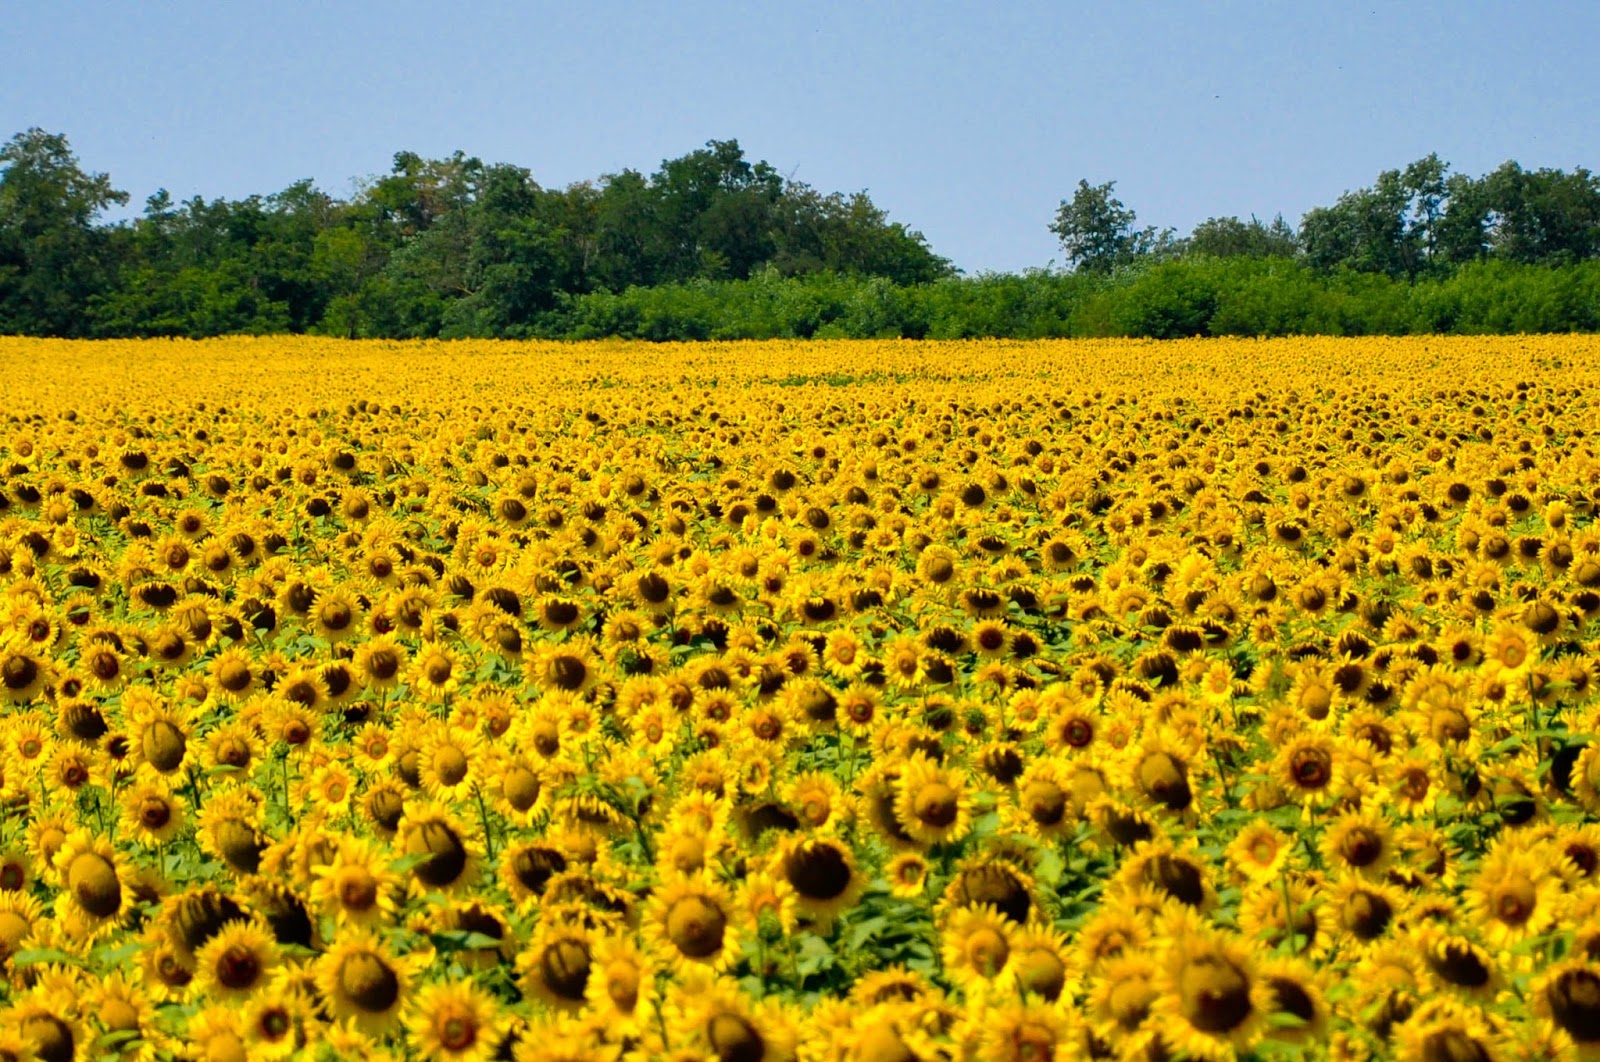 A sunflower field just outside Varna in Bulgaria